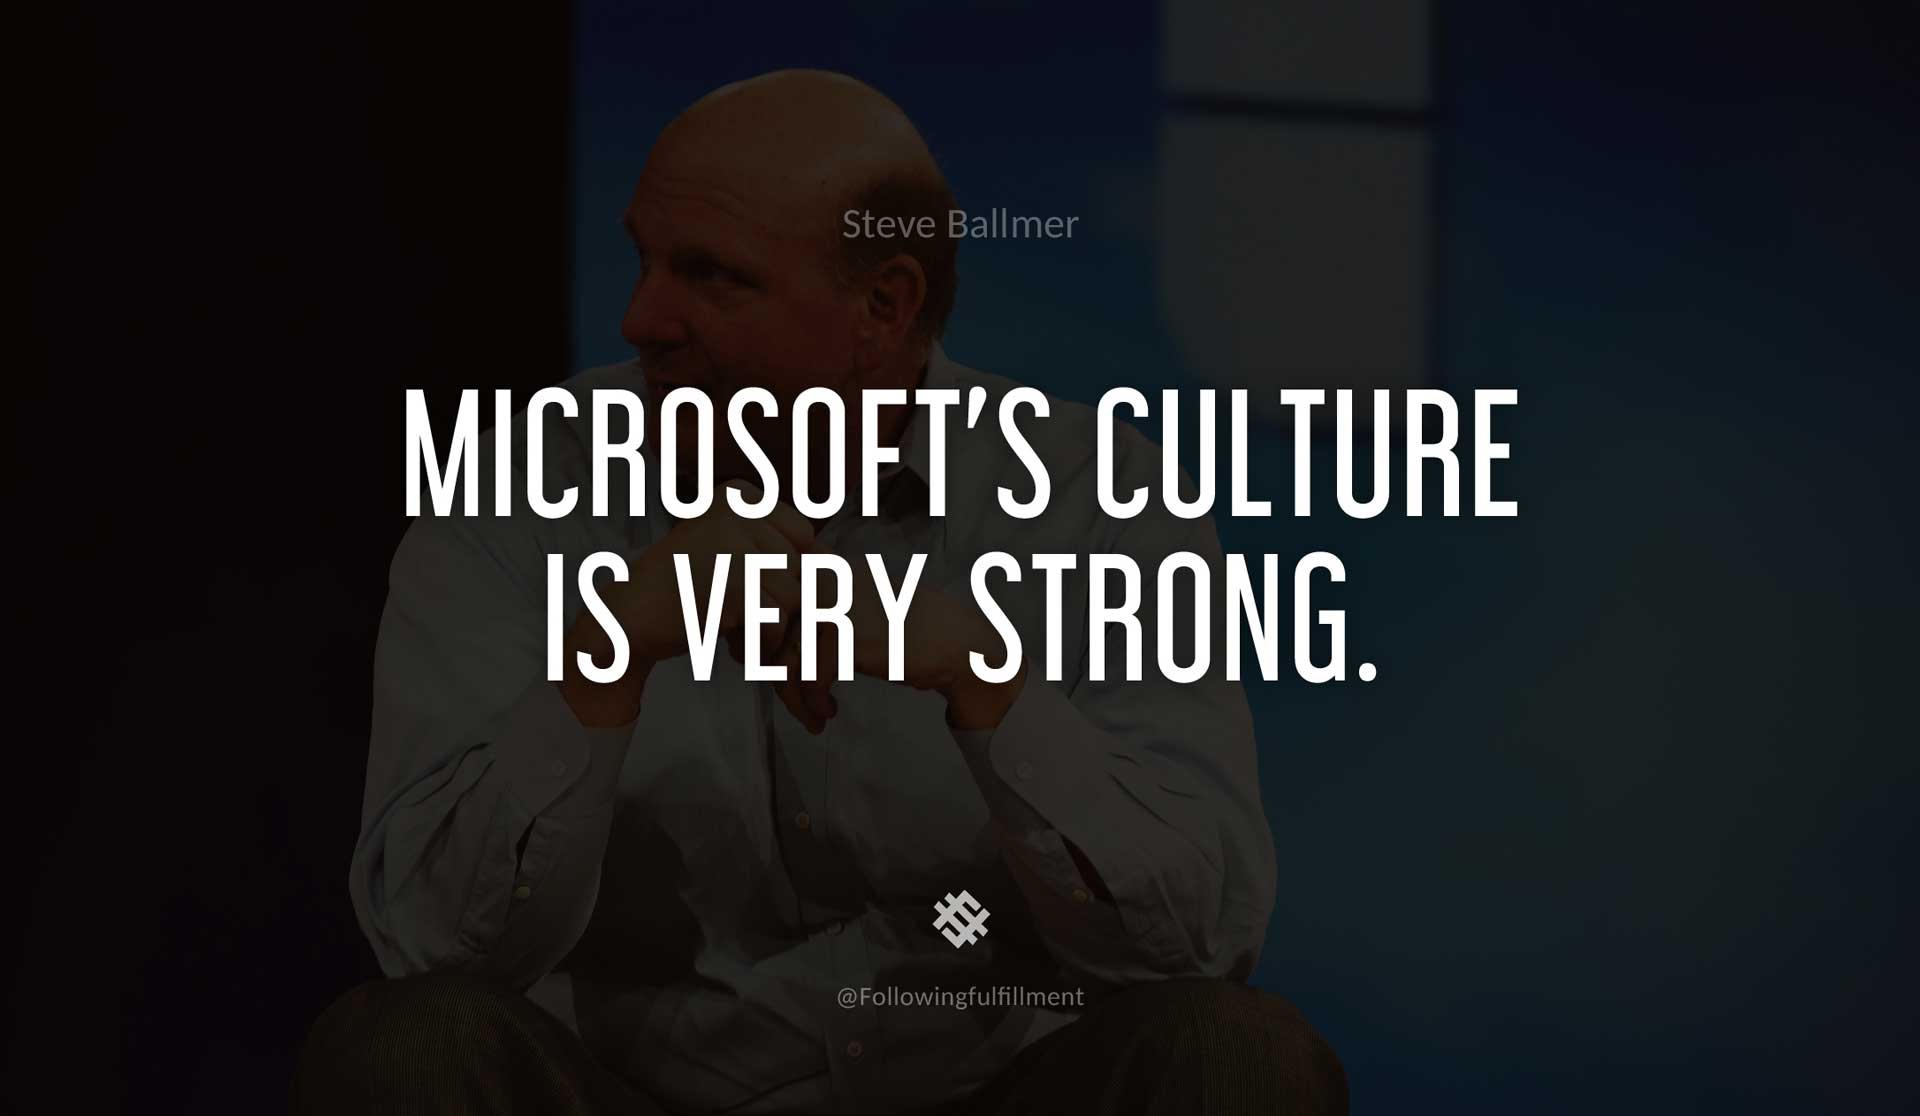 Microsoft's-culture-is-very-strong.-STEVE-BALLMER-Quote.jpg